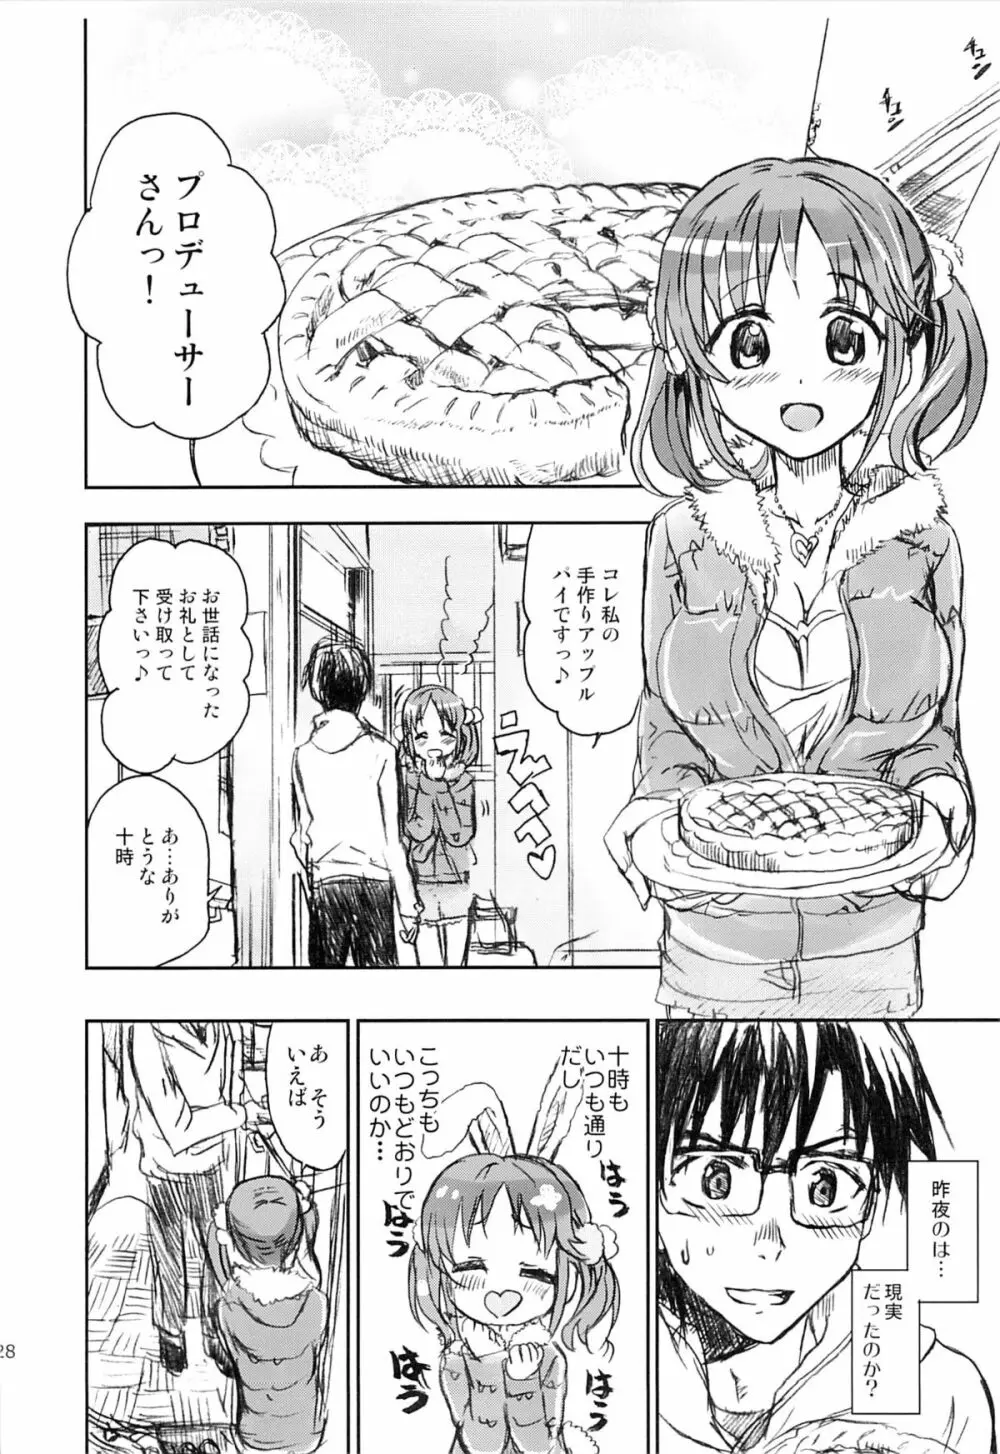 Passion Fruit Girls #十時愛梨 プリンセスバニーは眠らない。 Page.27